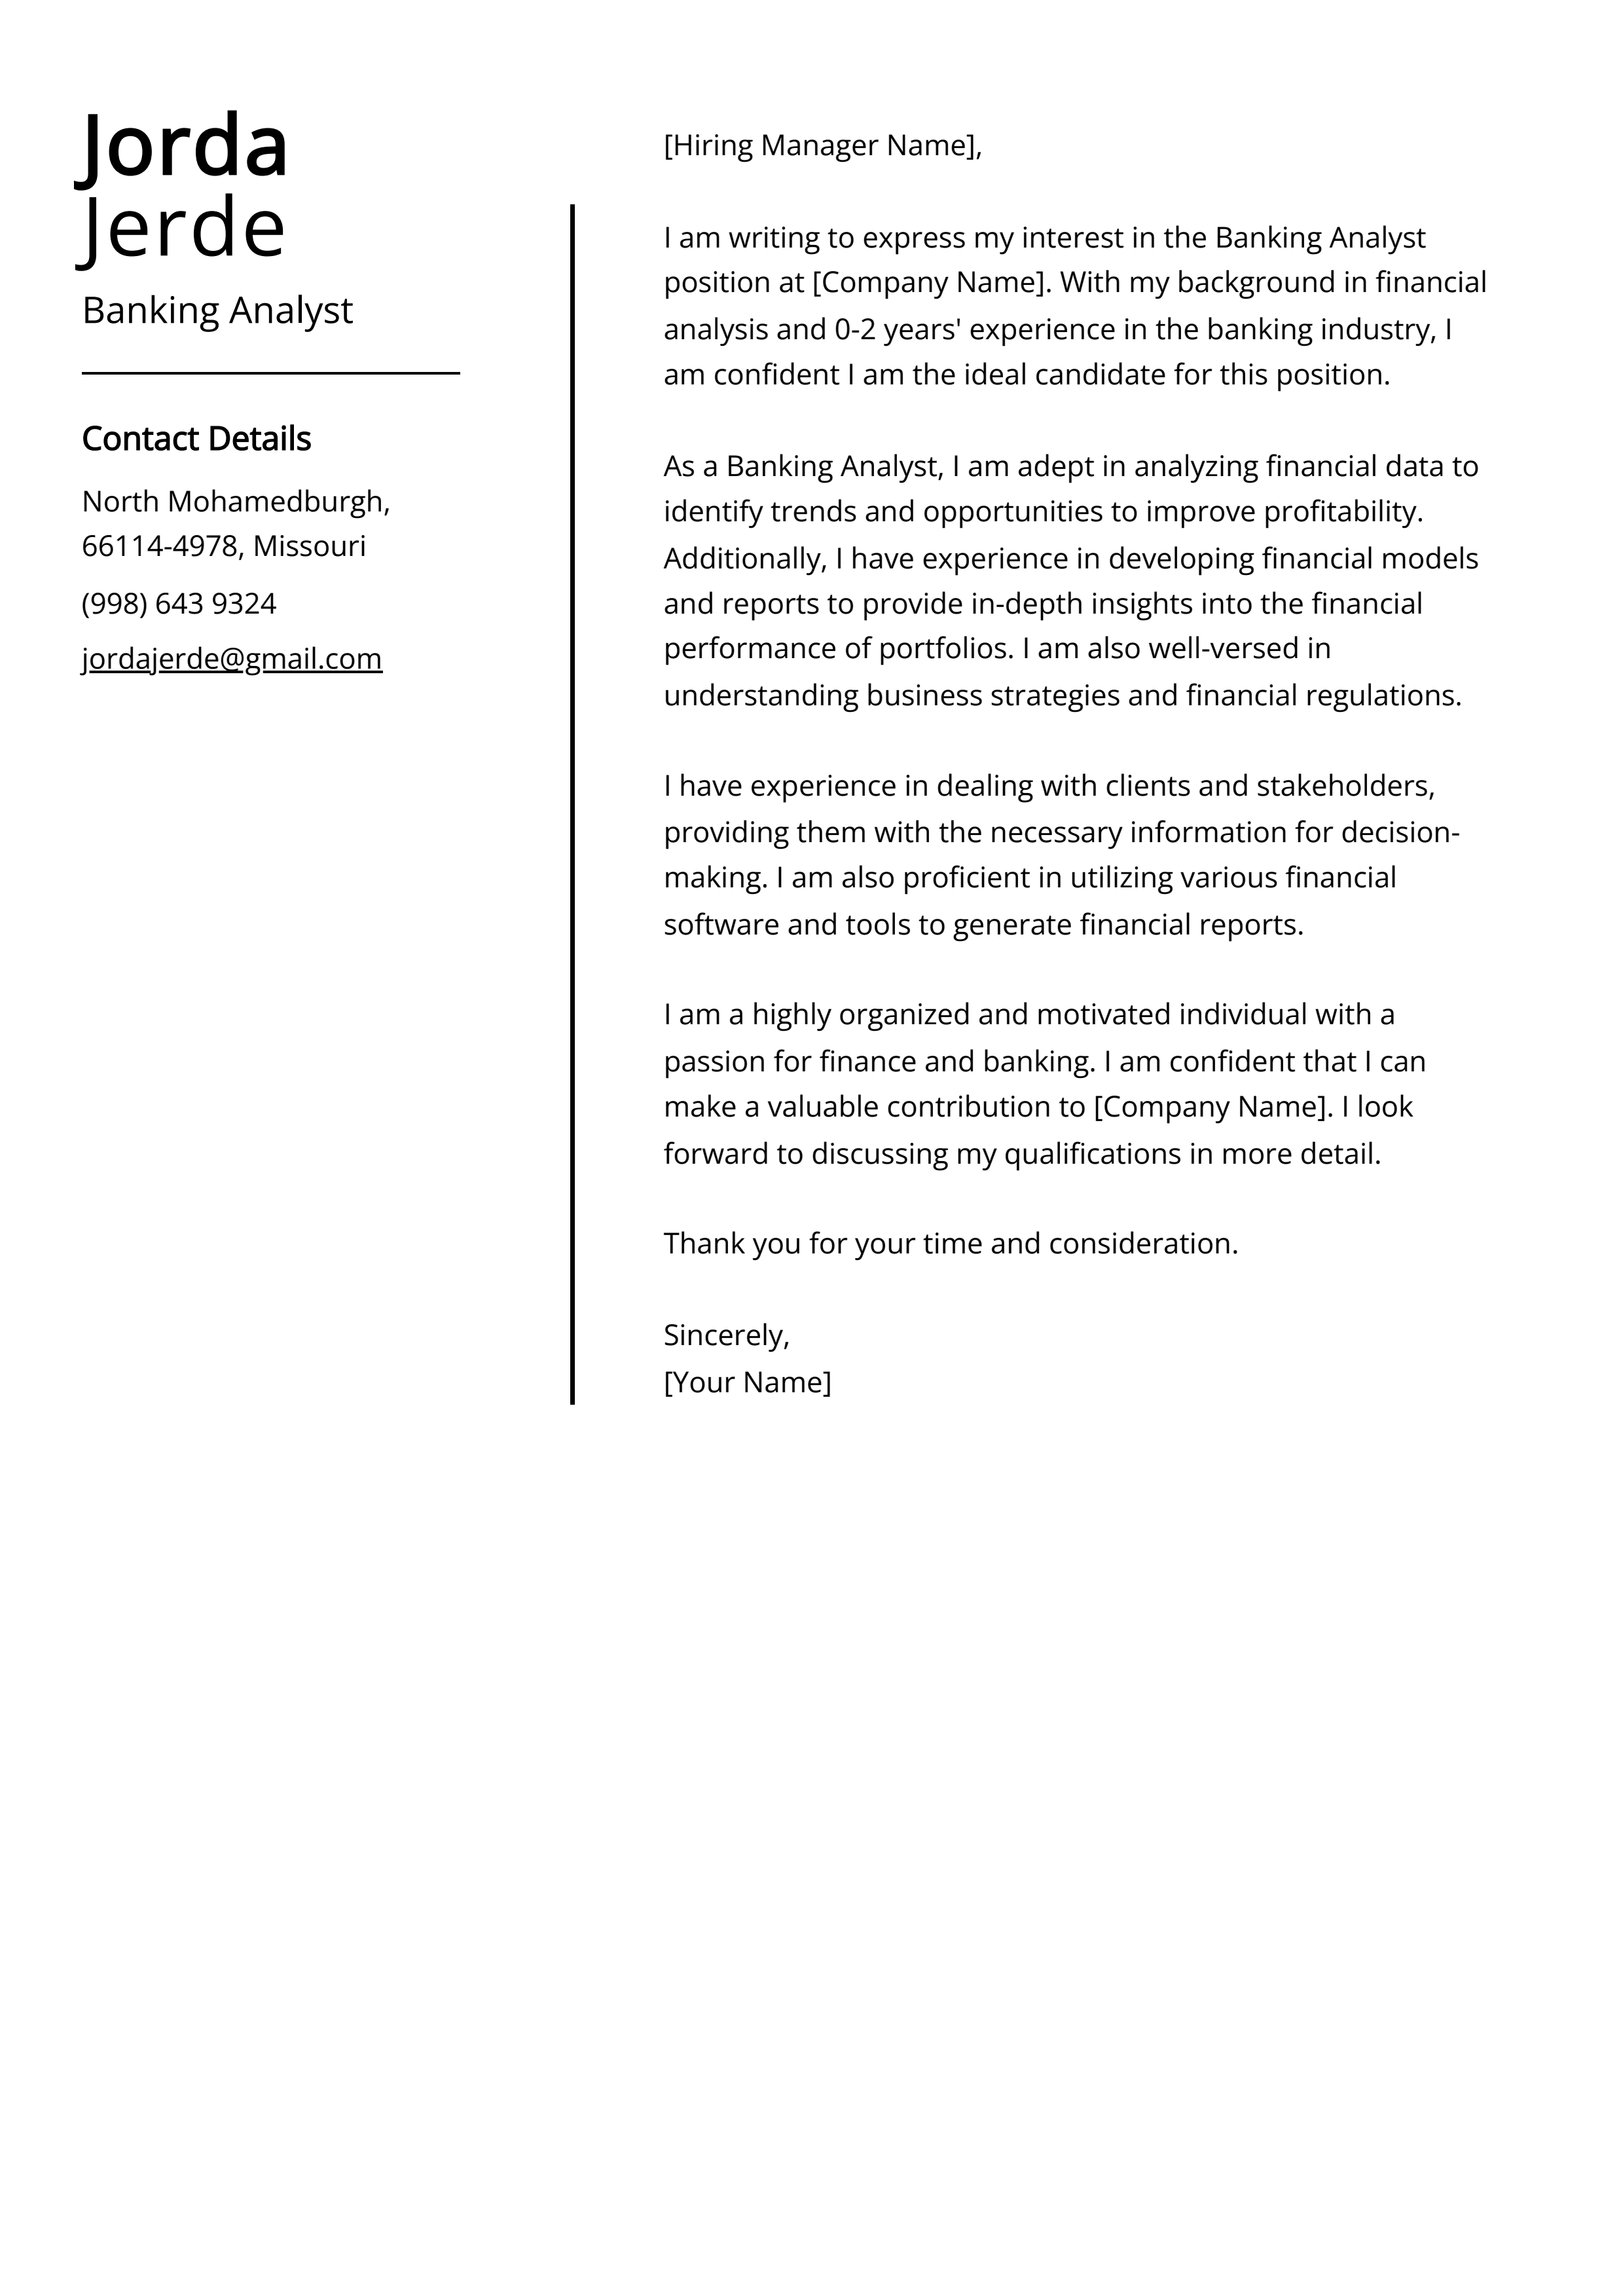 Banking Analyst Cover Letter Example